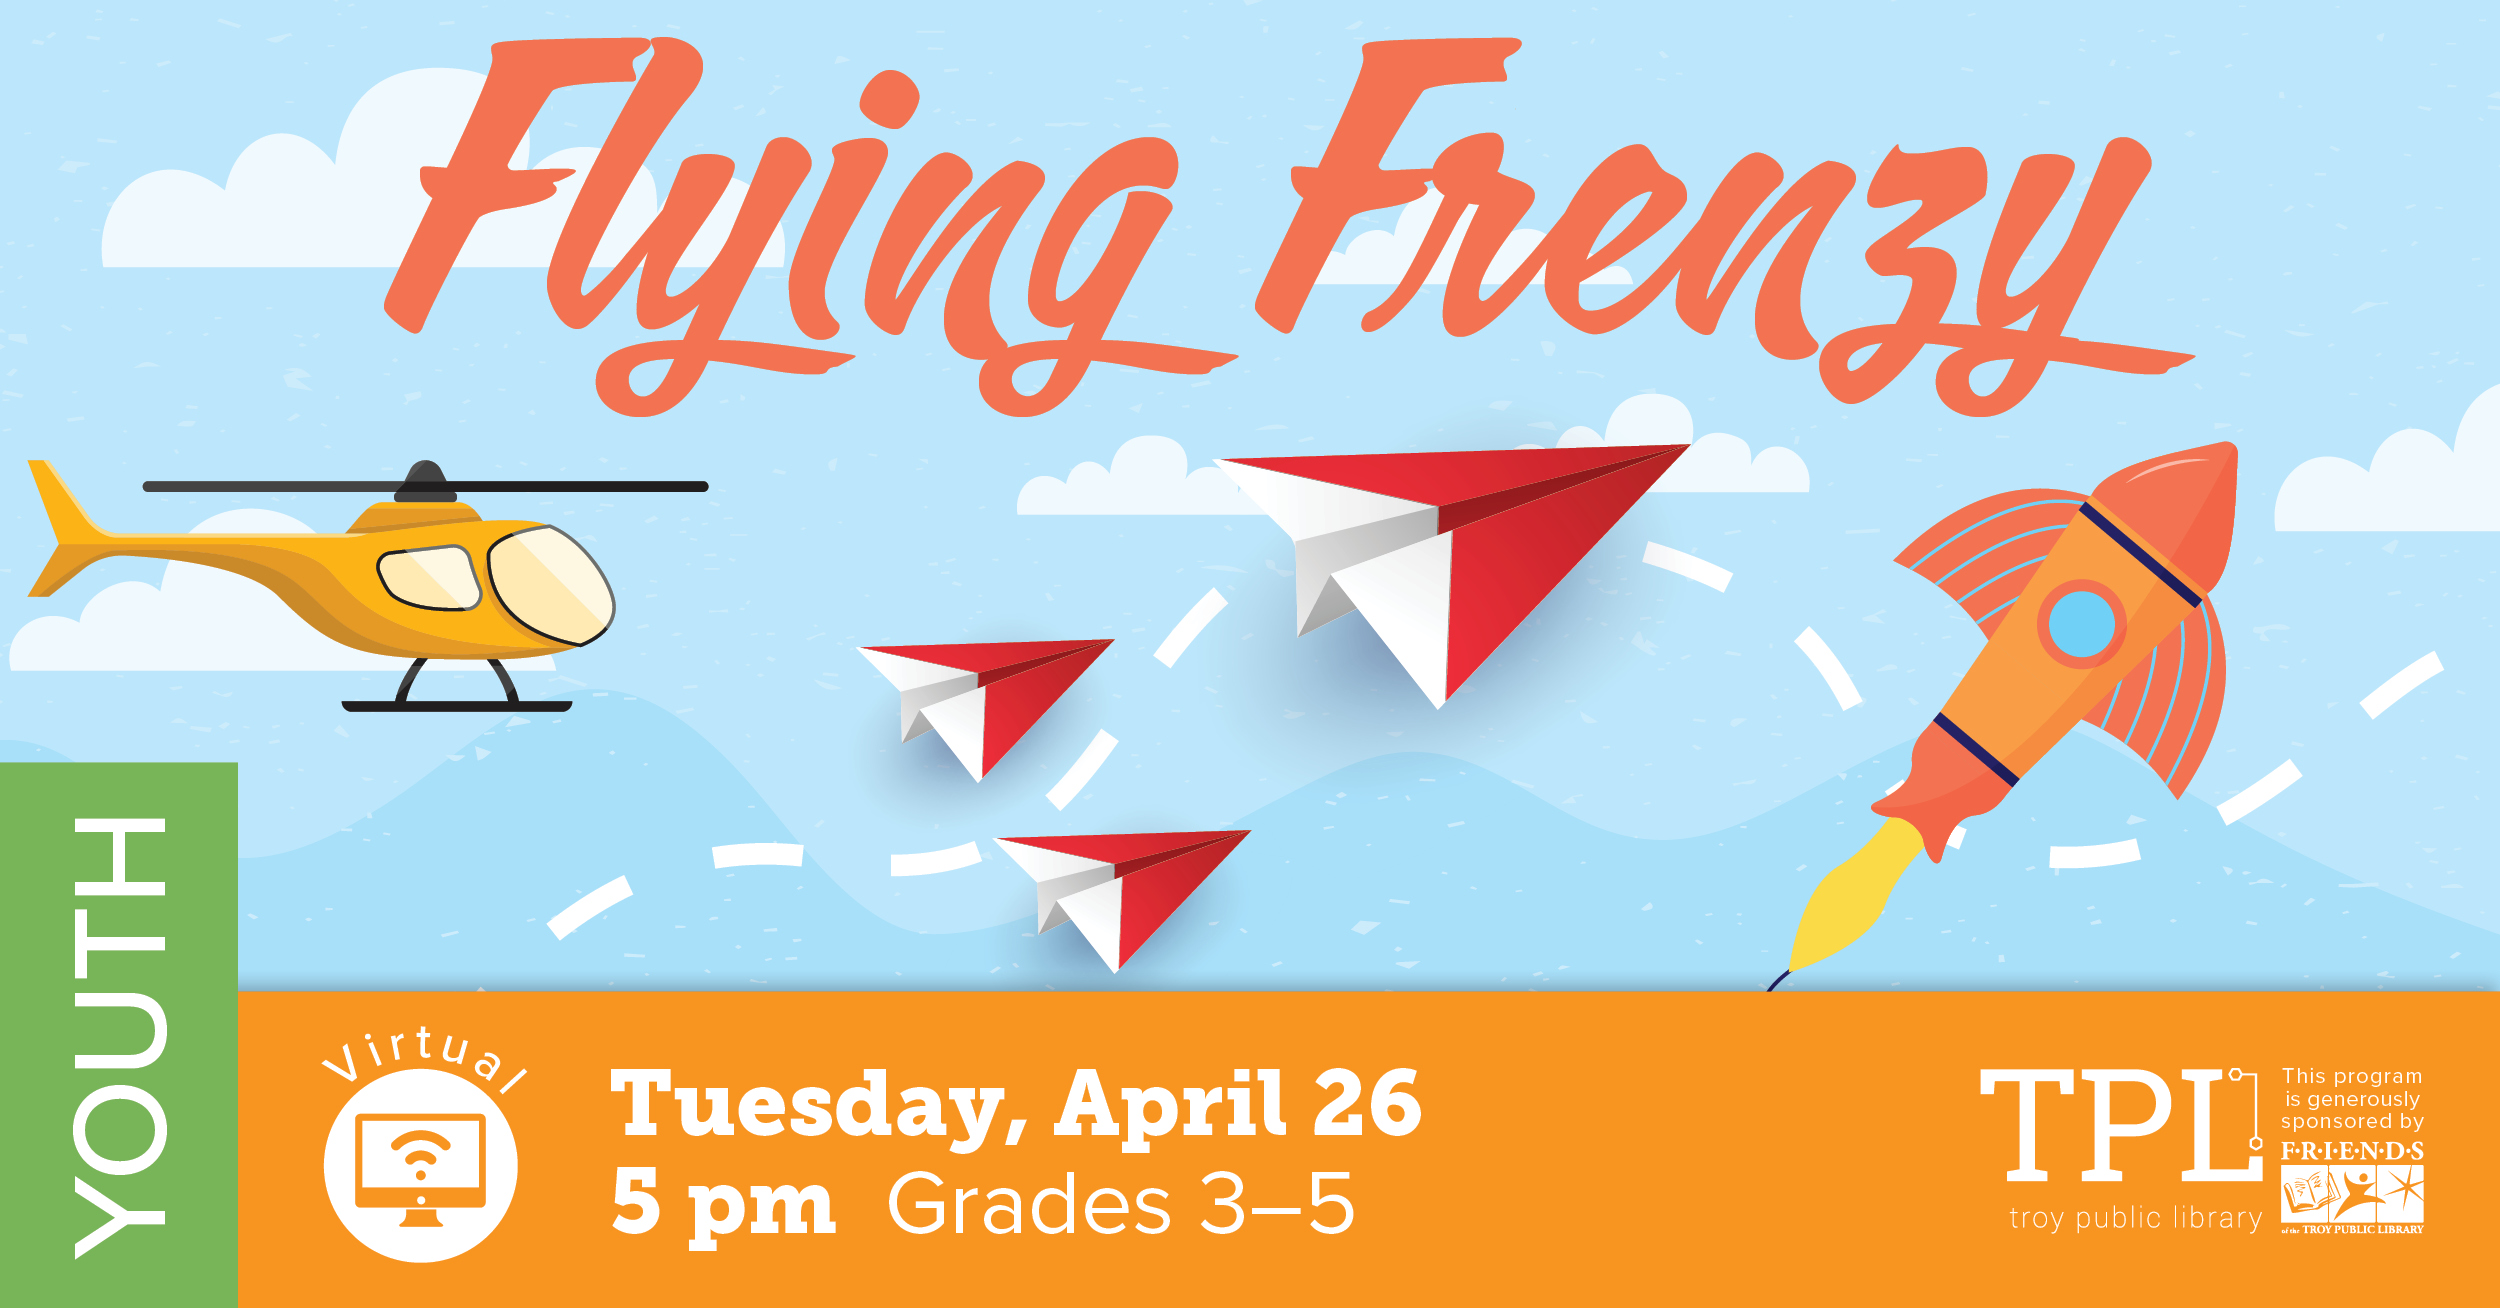 Flying Frenzy. Virtual Program on Tuesday, April 26th at 5 pm for grades 3 to 5. Sponsored by the Friends of the Troy Public Library. 